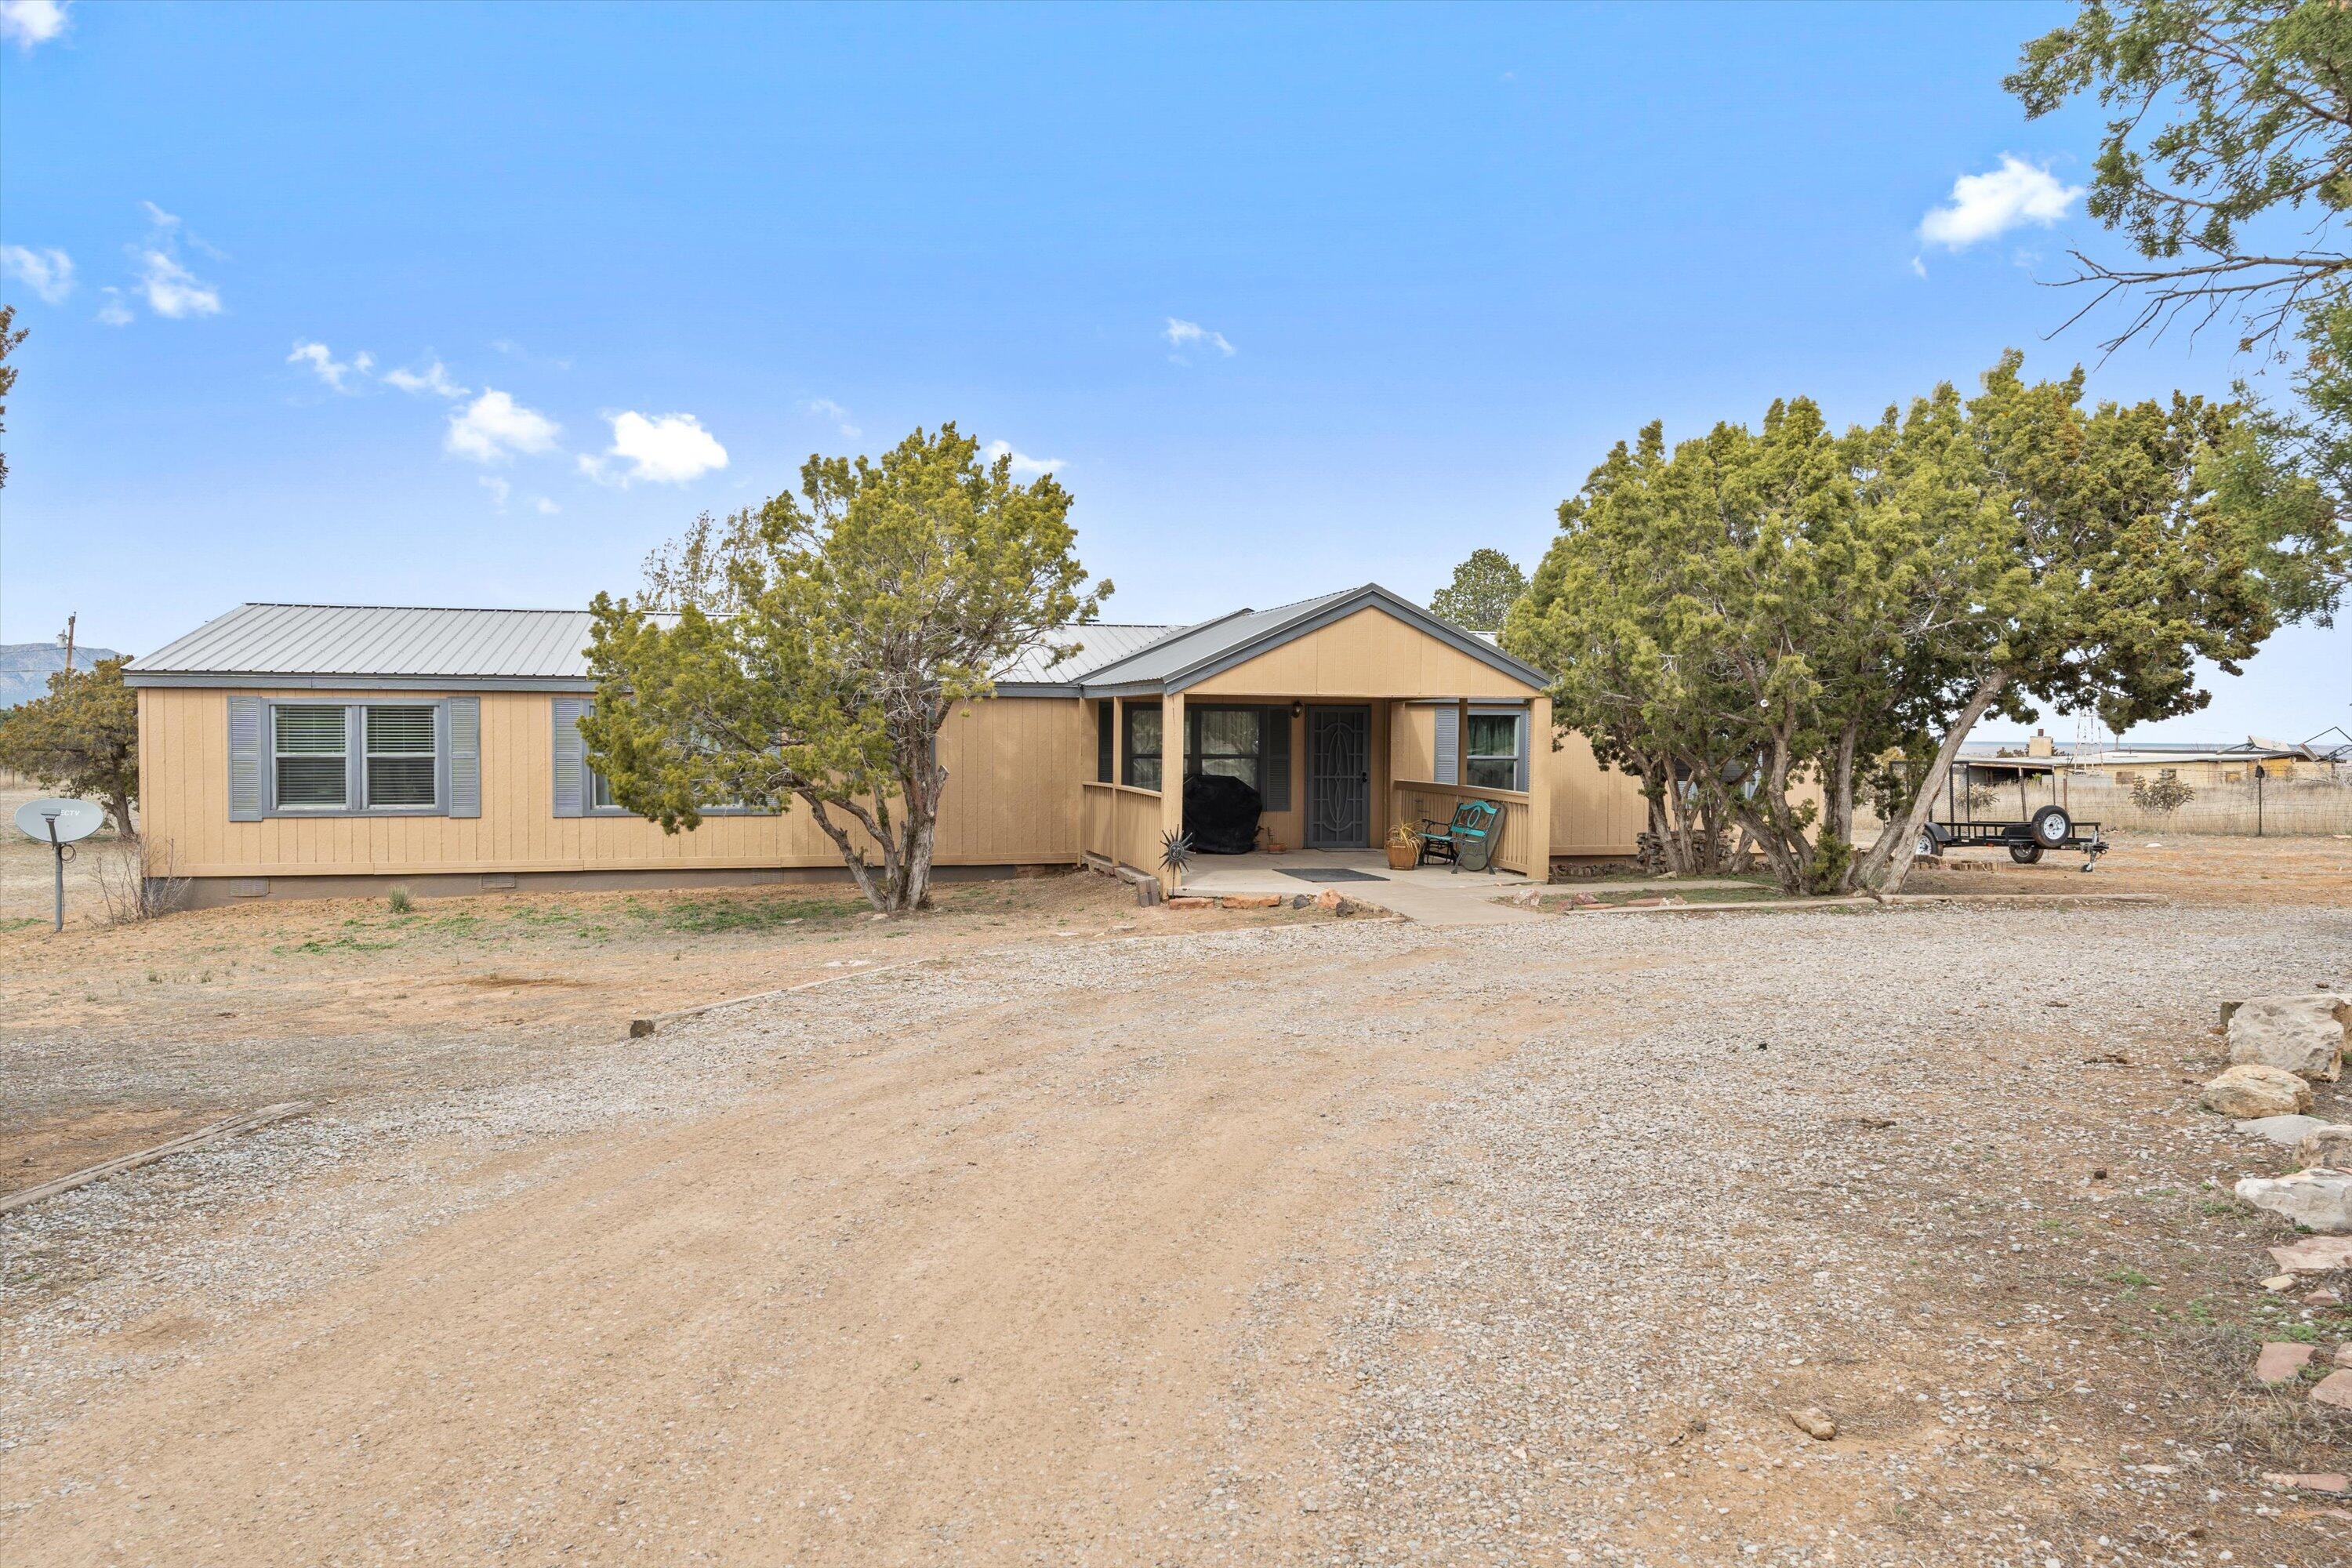 39 E Frontage Road, Edgewood, NM 87015